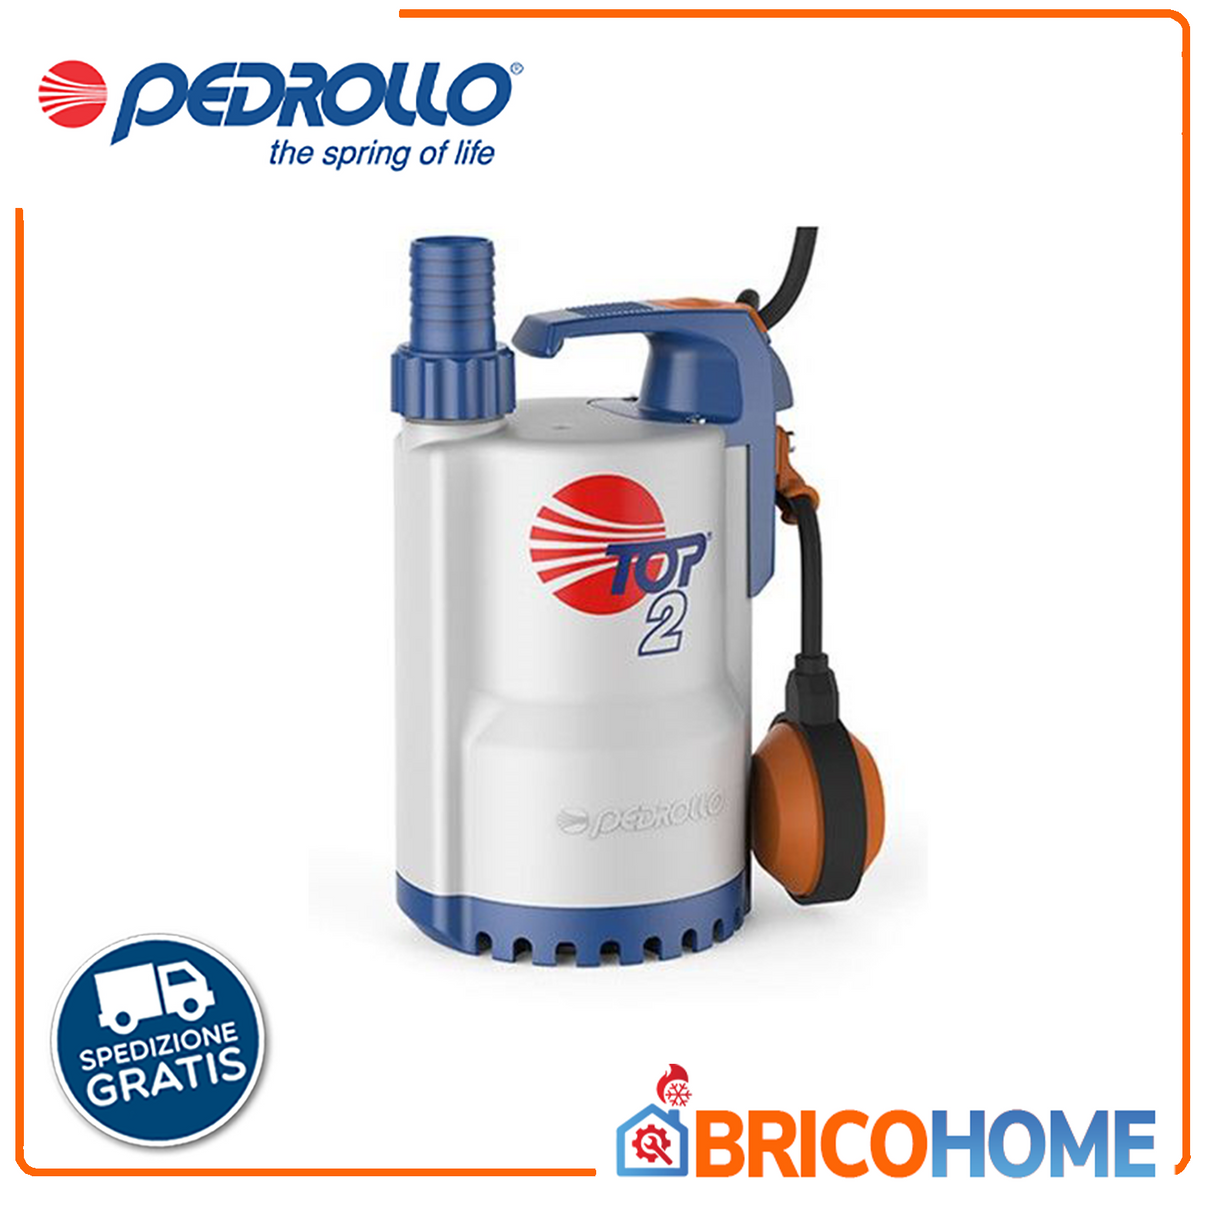 TOP 2 Pedrollo submersible electric drainage pump